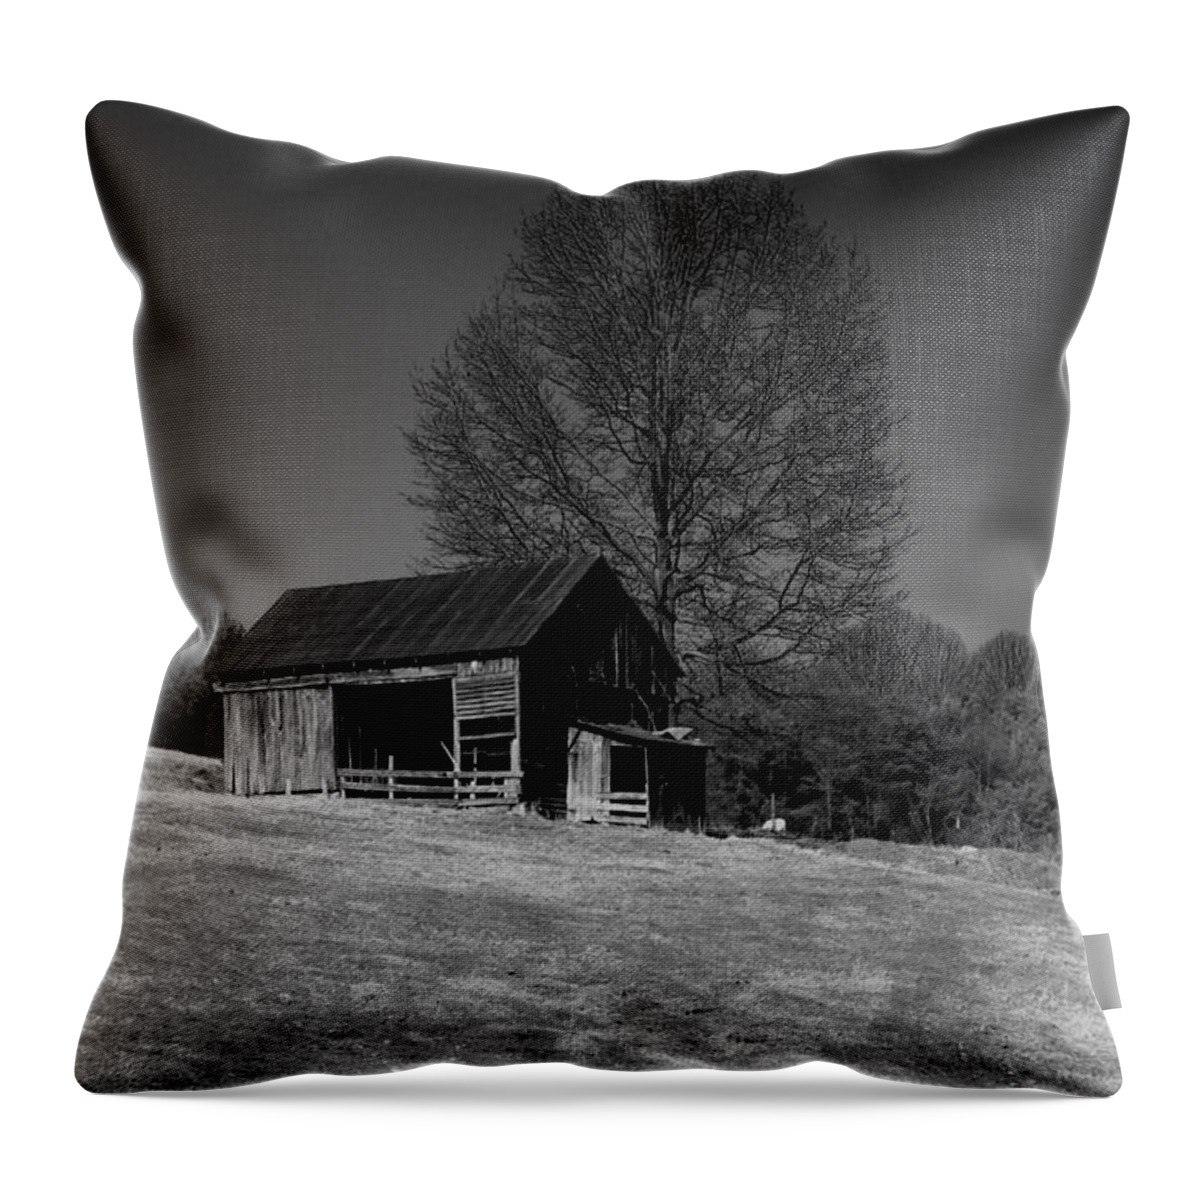 Tennessee Throw Pillow featuring the photograph Tennessee Farm by Karen Harrison Brown